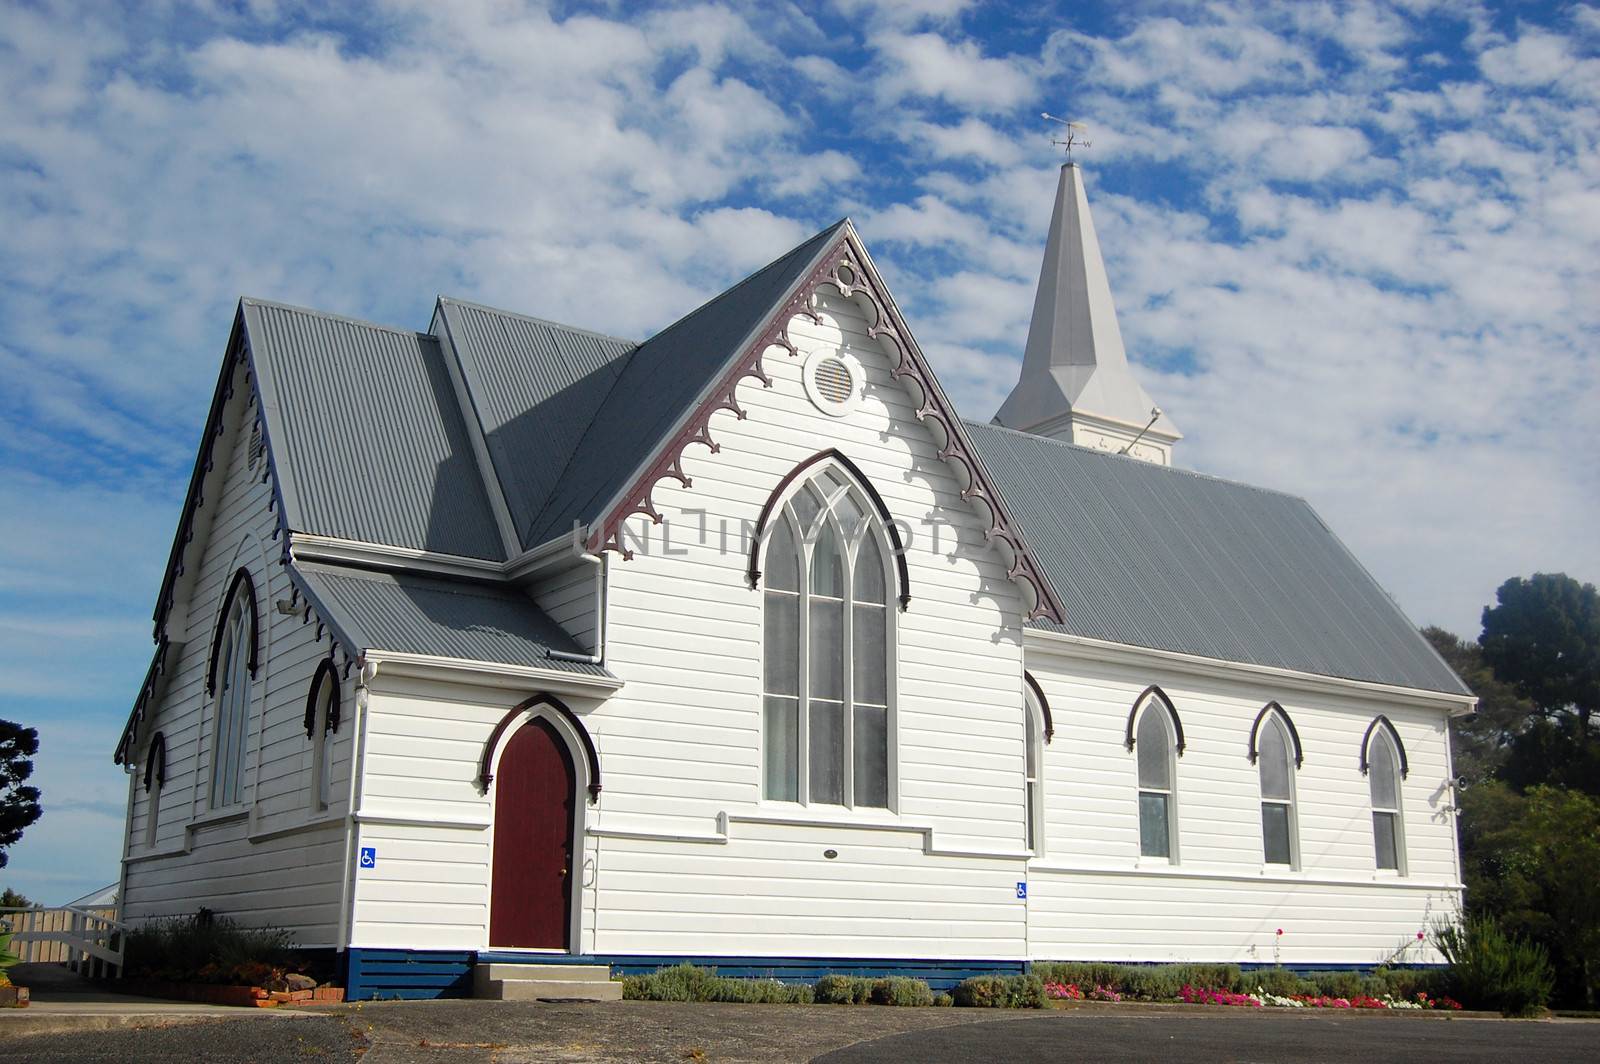 White timber chirch building, Dargaville town, New Zealand